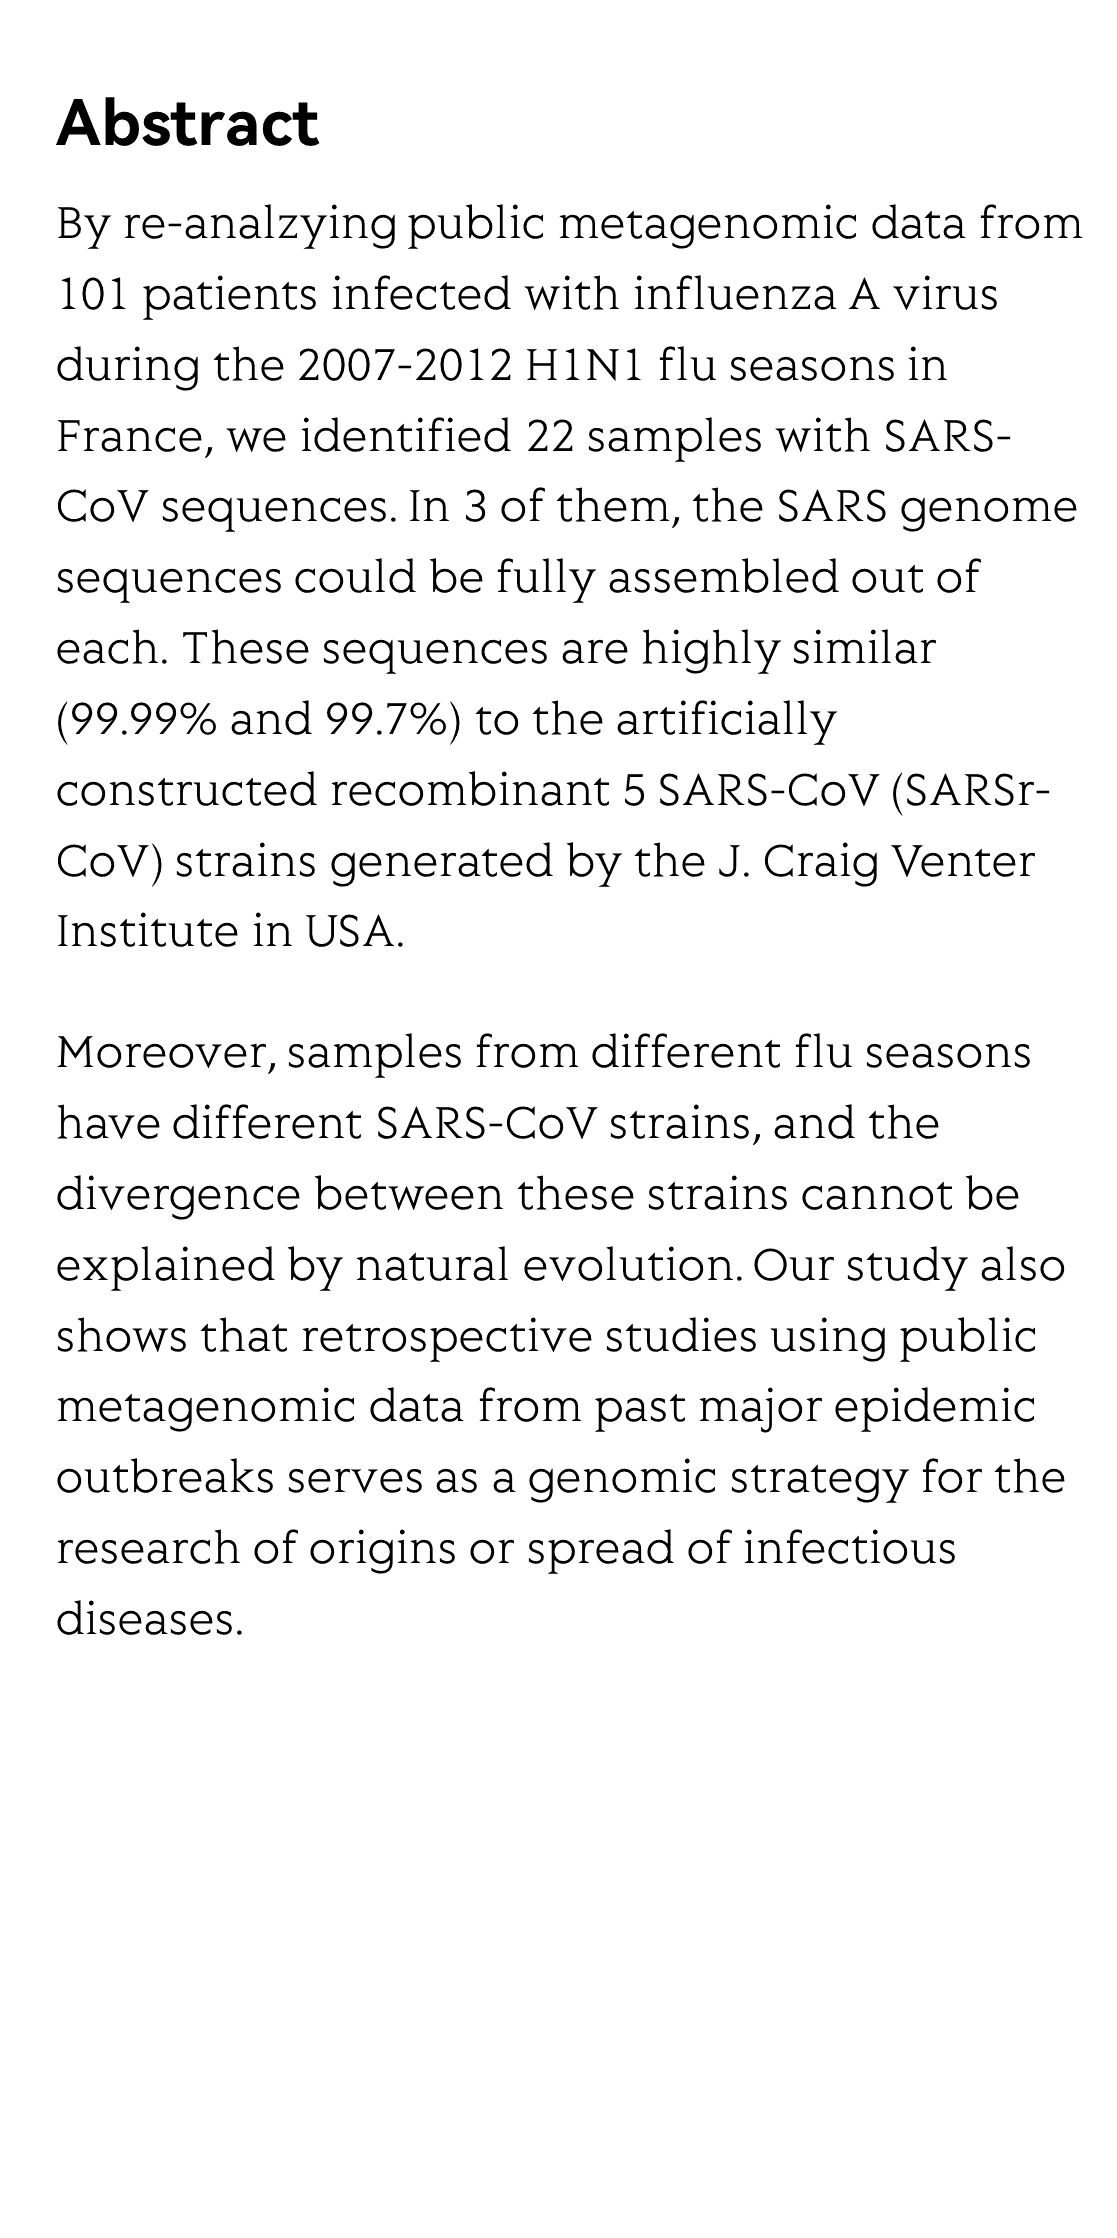 Metagenomic evidence for the coexistence of SARS and H1N1 in patients from 2007-2012 flu seasons_2